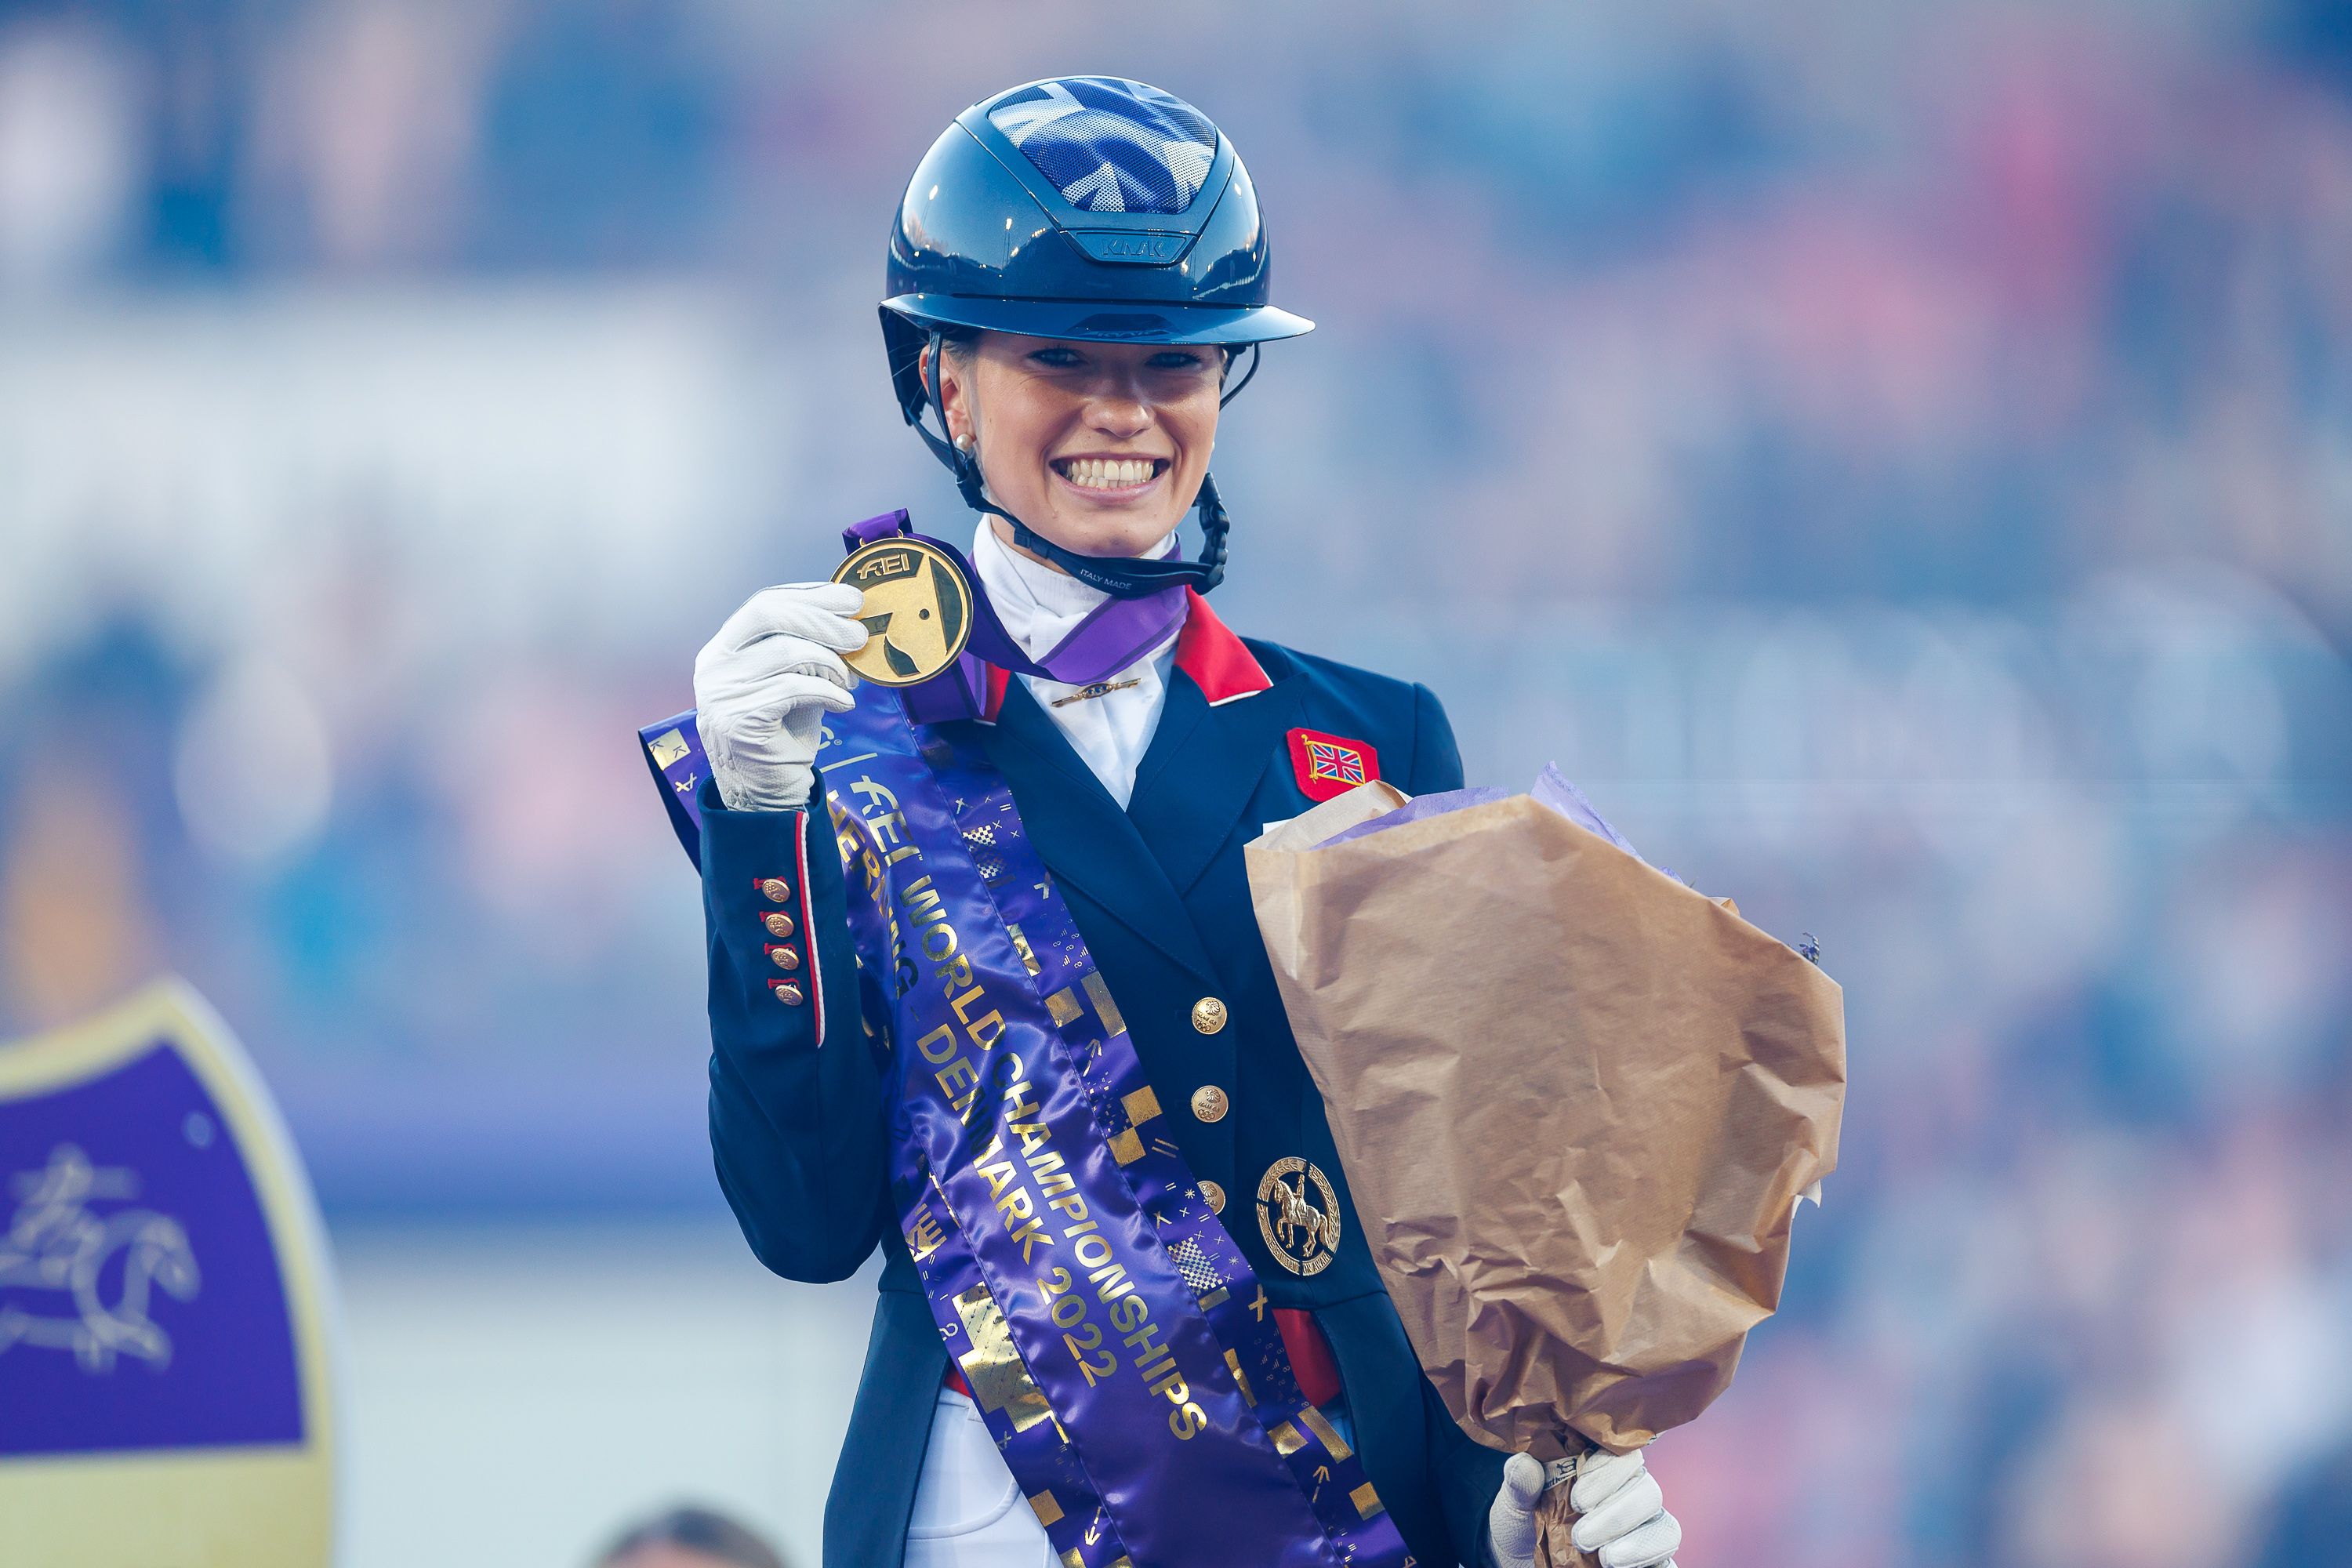 Charlotte Fry takes gold for Great Britain at the ECCO FEI World Championships in Herning.